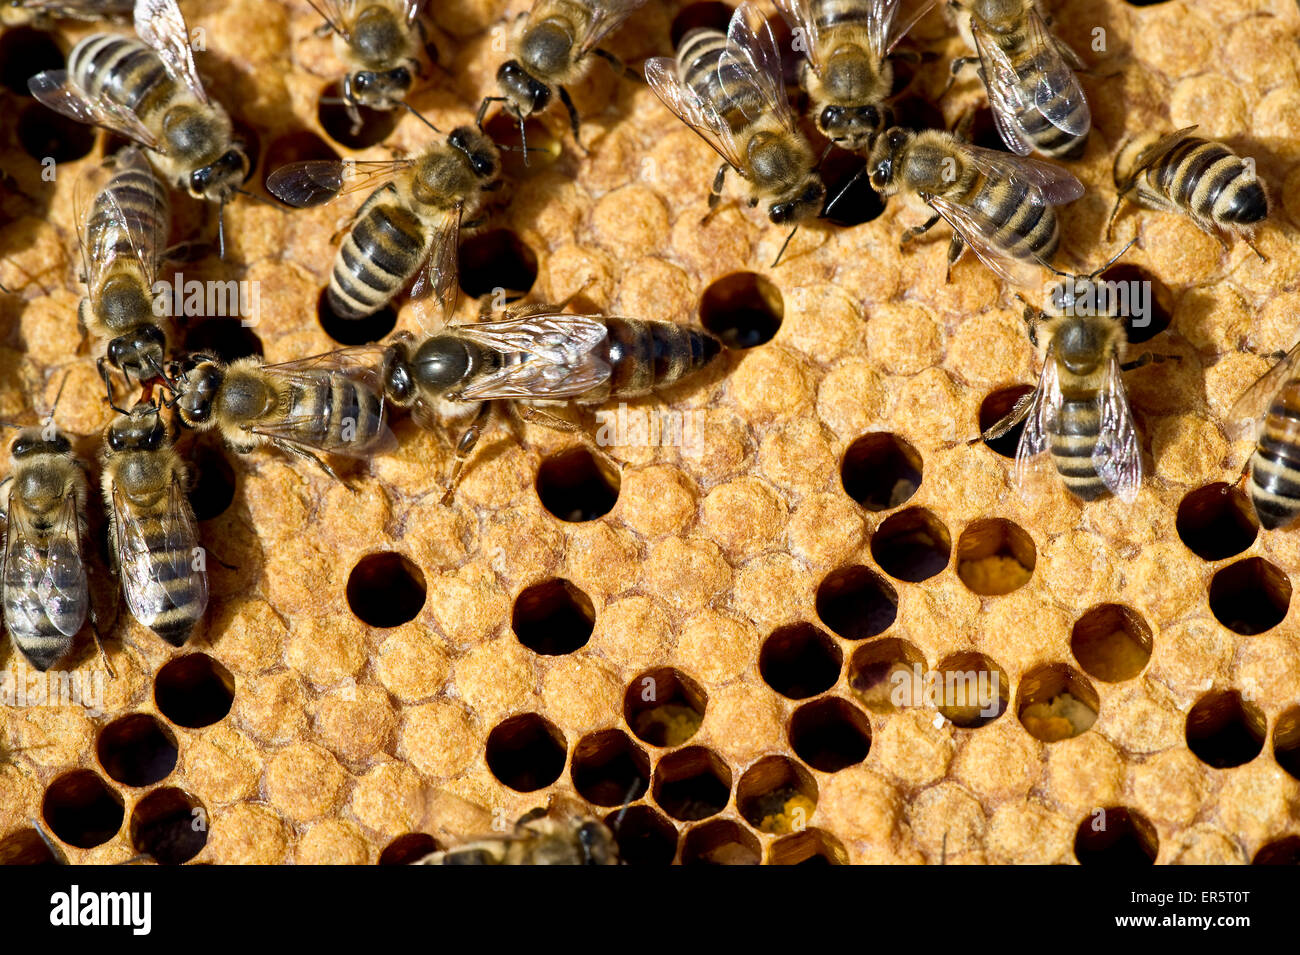 Queen bee and bees on honeycombs, Freiburg im Breisgau, Baden-Wuerttemberg, Germany Stock Photo